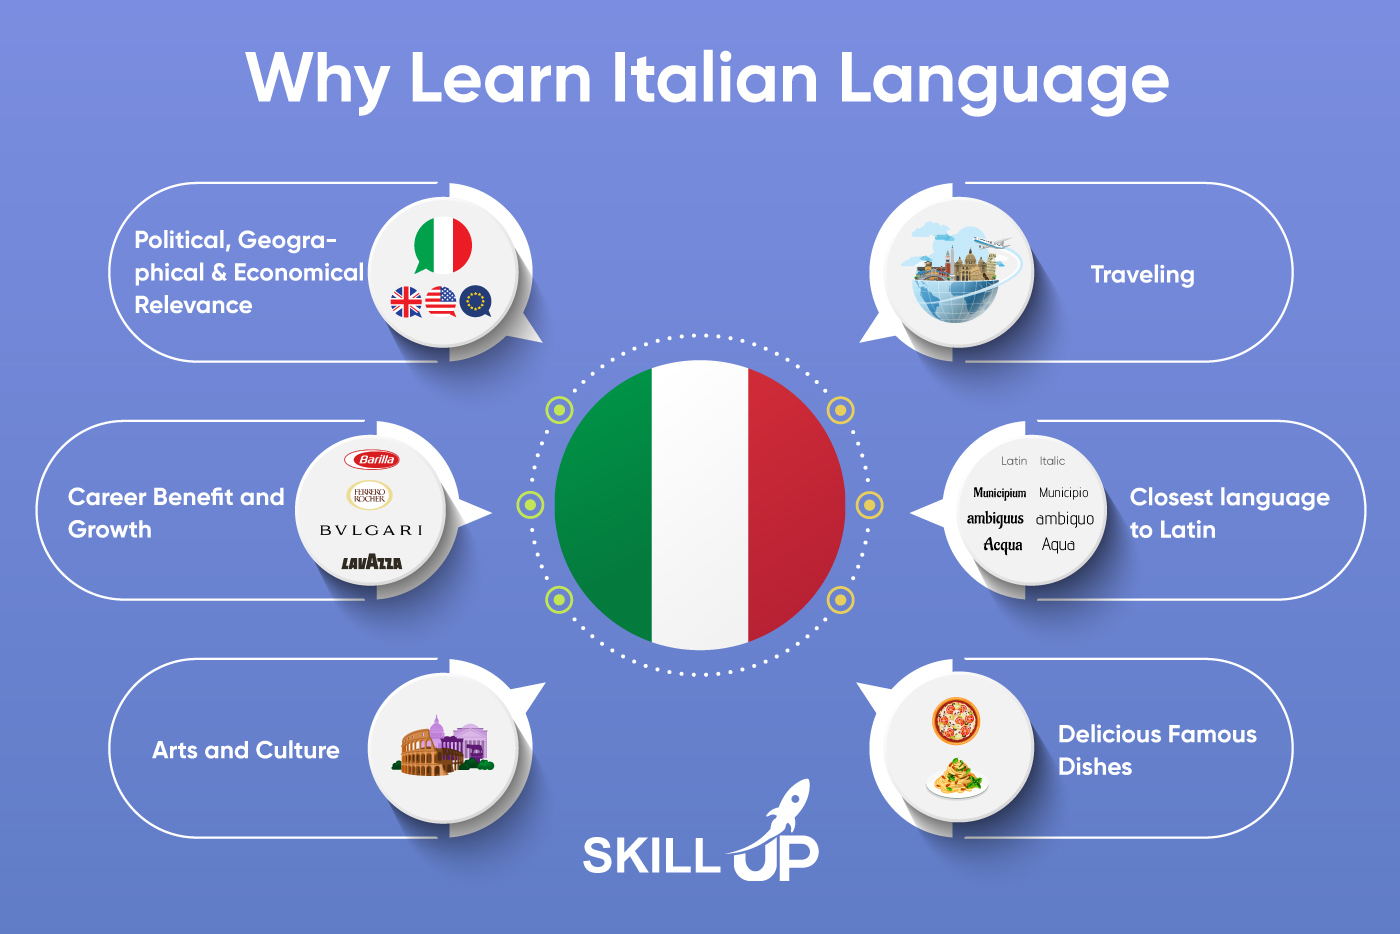 15 Proven Tips to Learn Italian Language-A guide to Fluent Italian Speaking Why you should learn to speak Italian